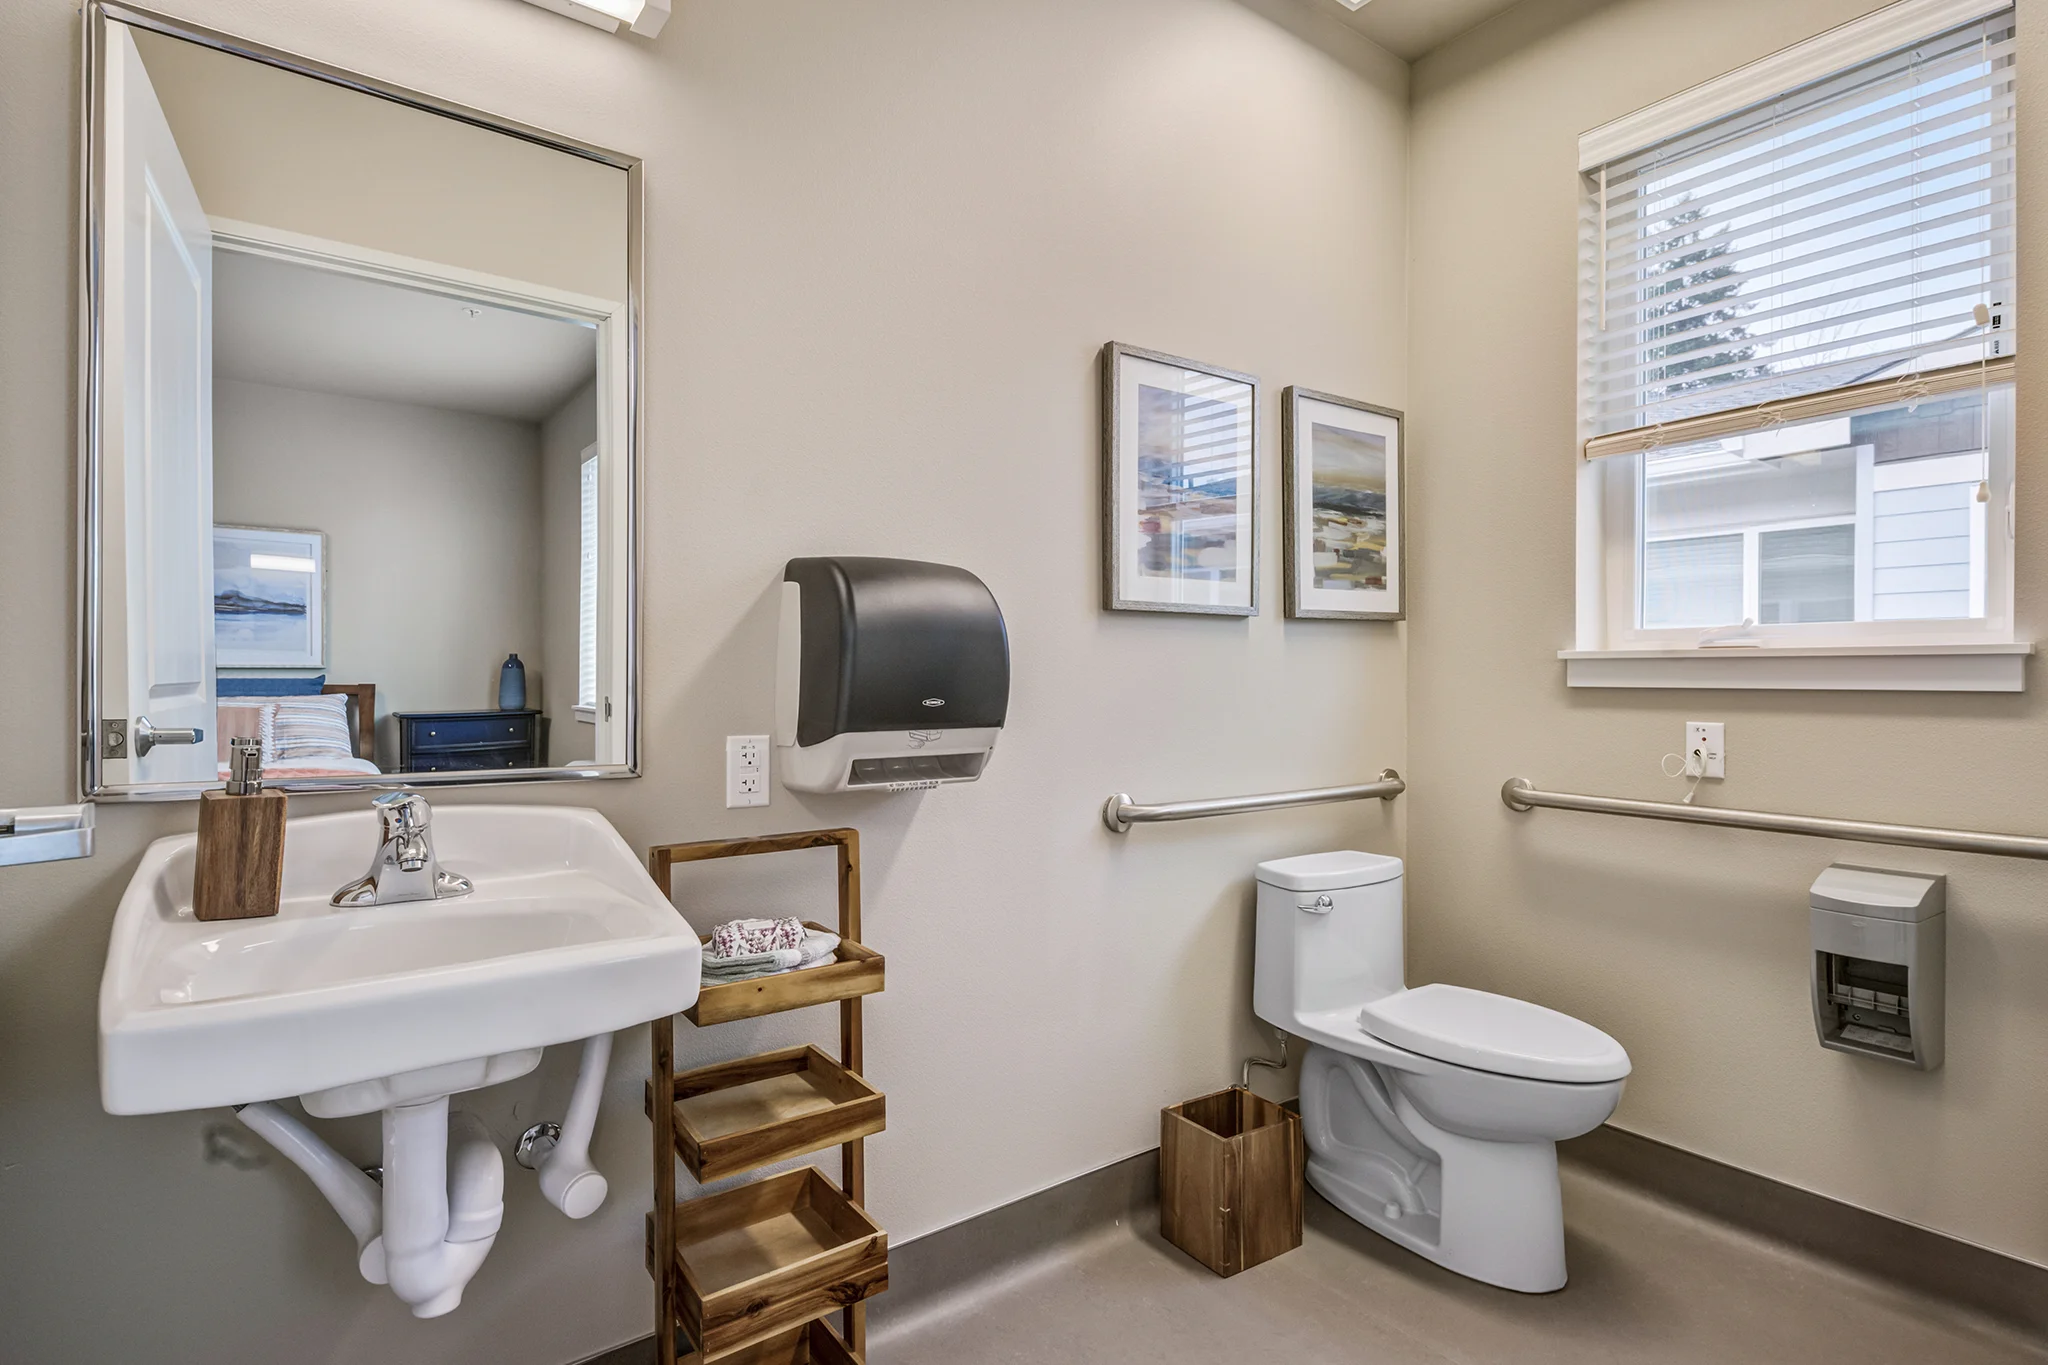 Spacious bathroom with appropriate senior accommodations